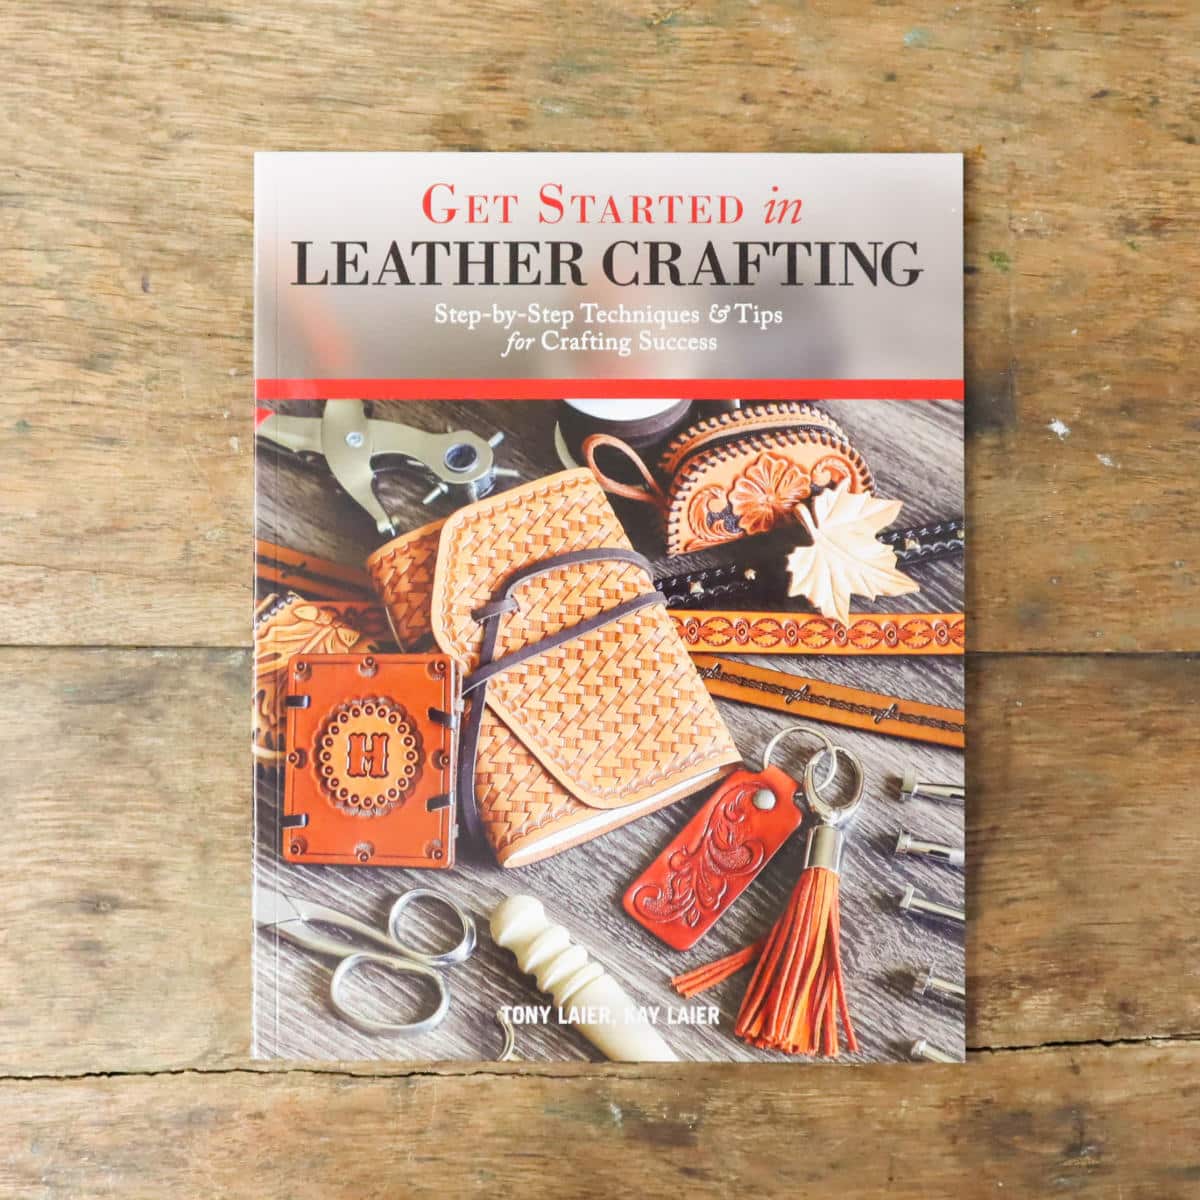 Getting Started in Leathercrafting 